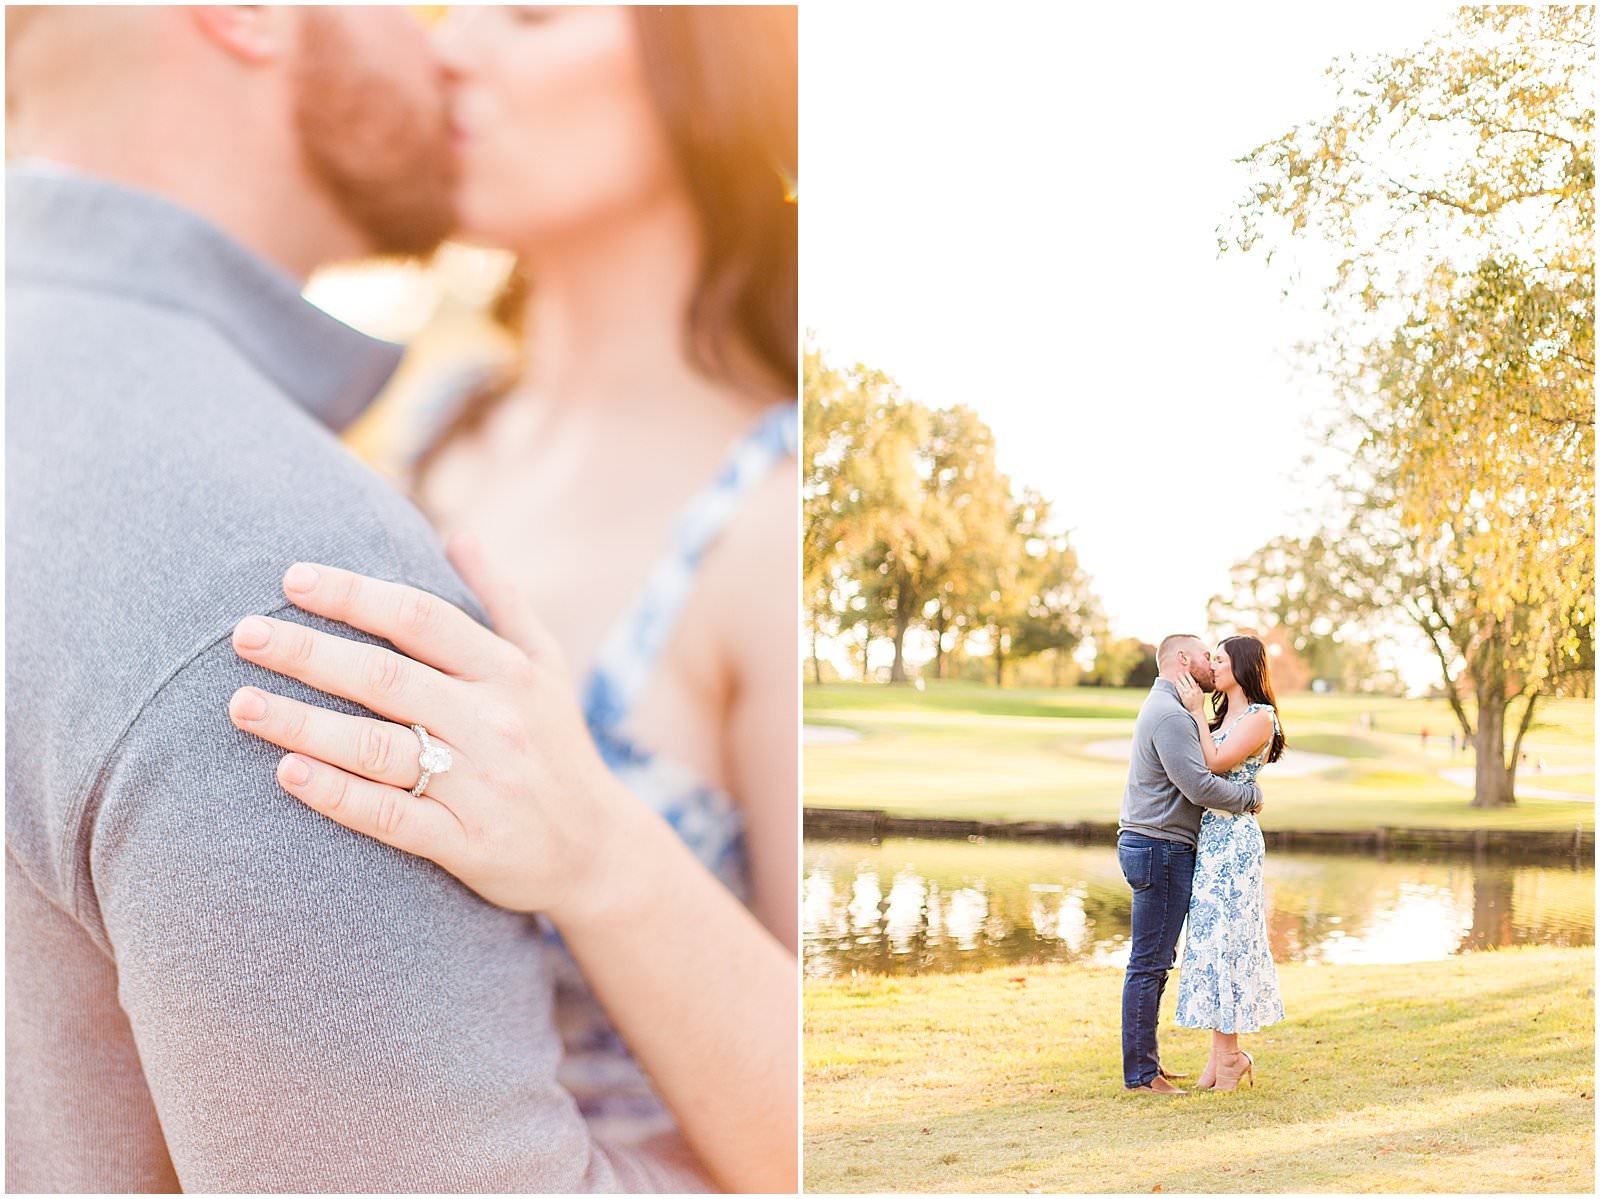 A Rolling Hills Country Club Engagement Session | Meagan and Kyle | Bret and Brandie Photography 0040.jpg